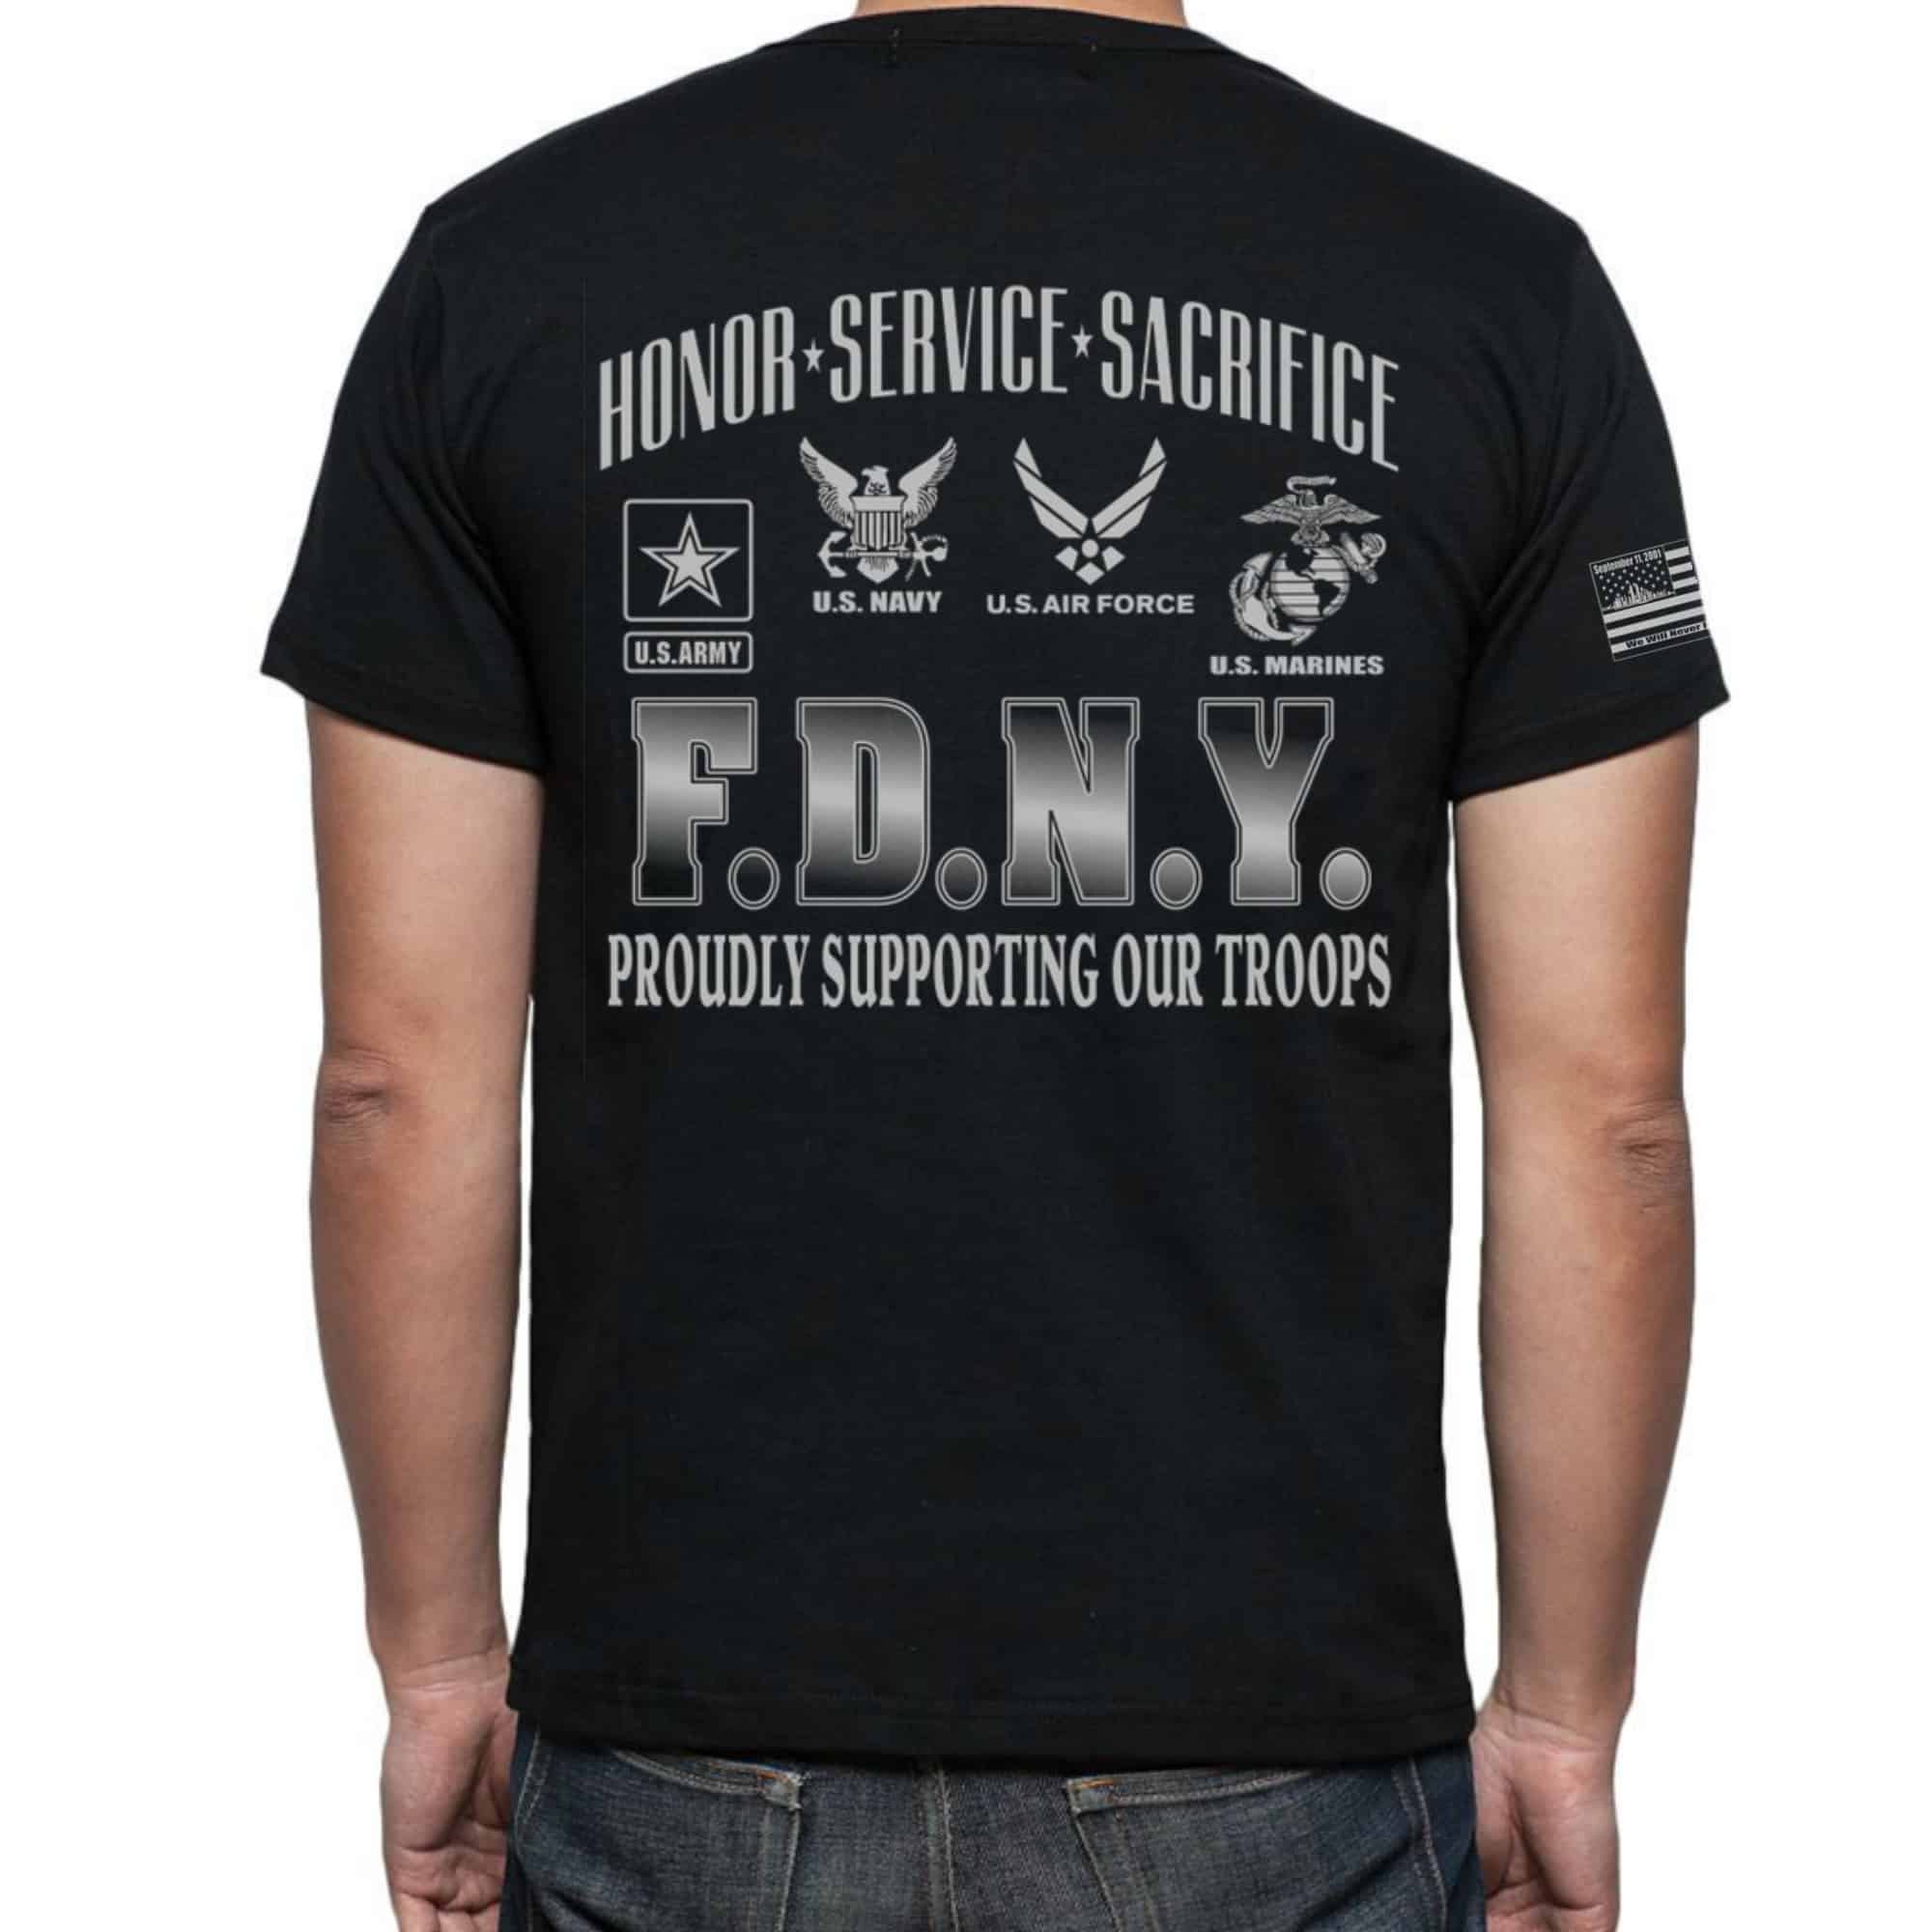 SUPPORT OUR TROOPS – FDNY Shop